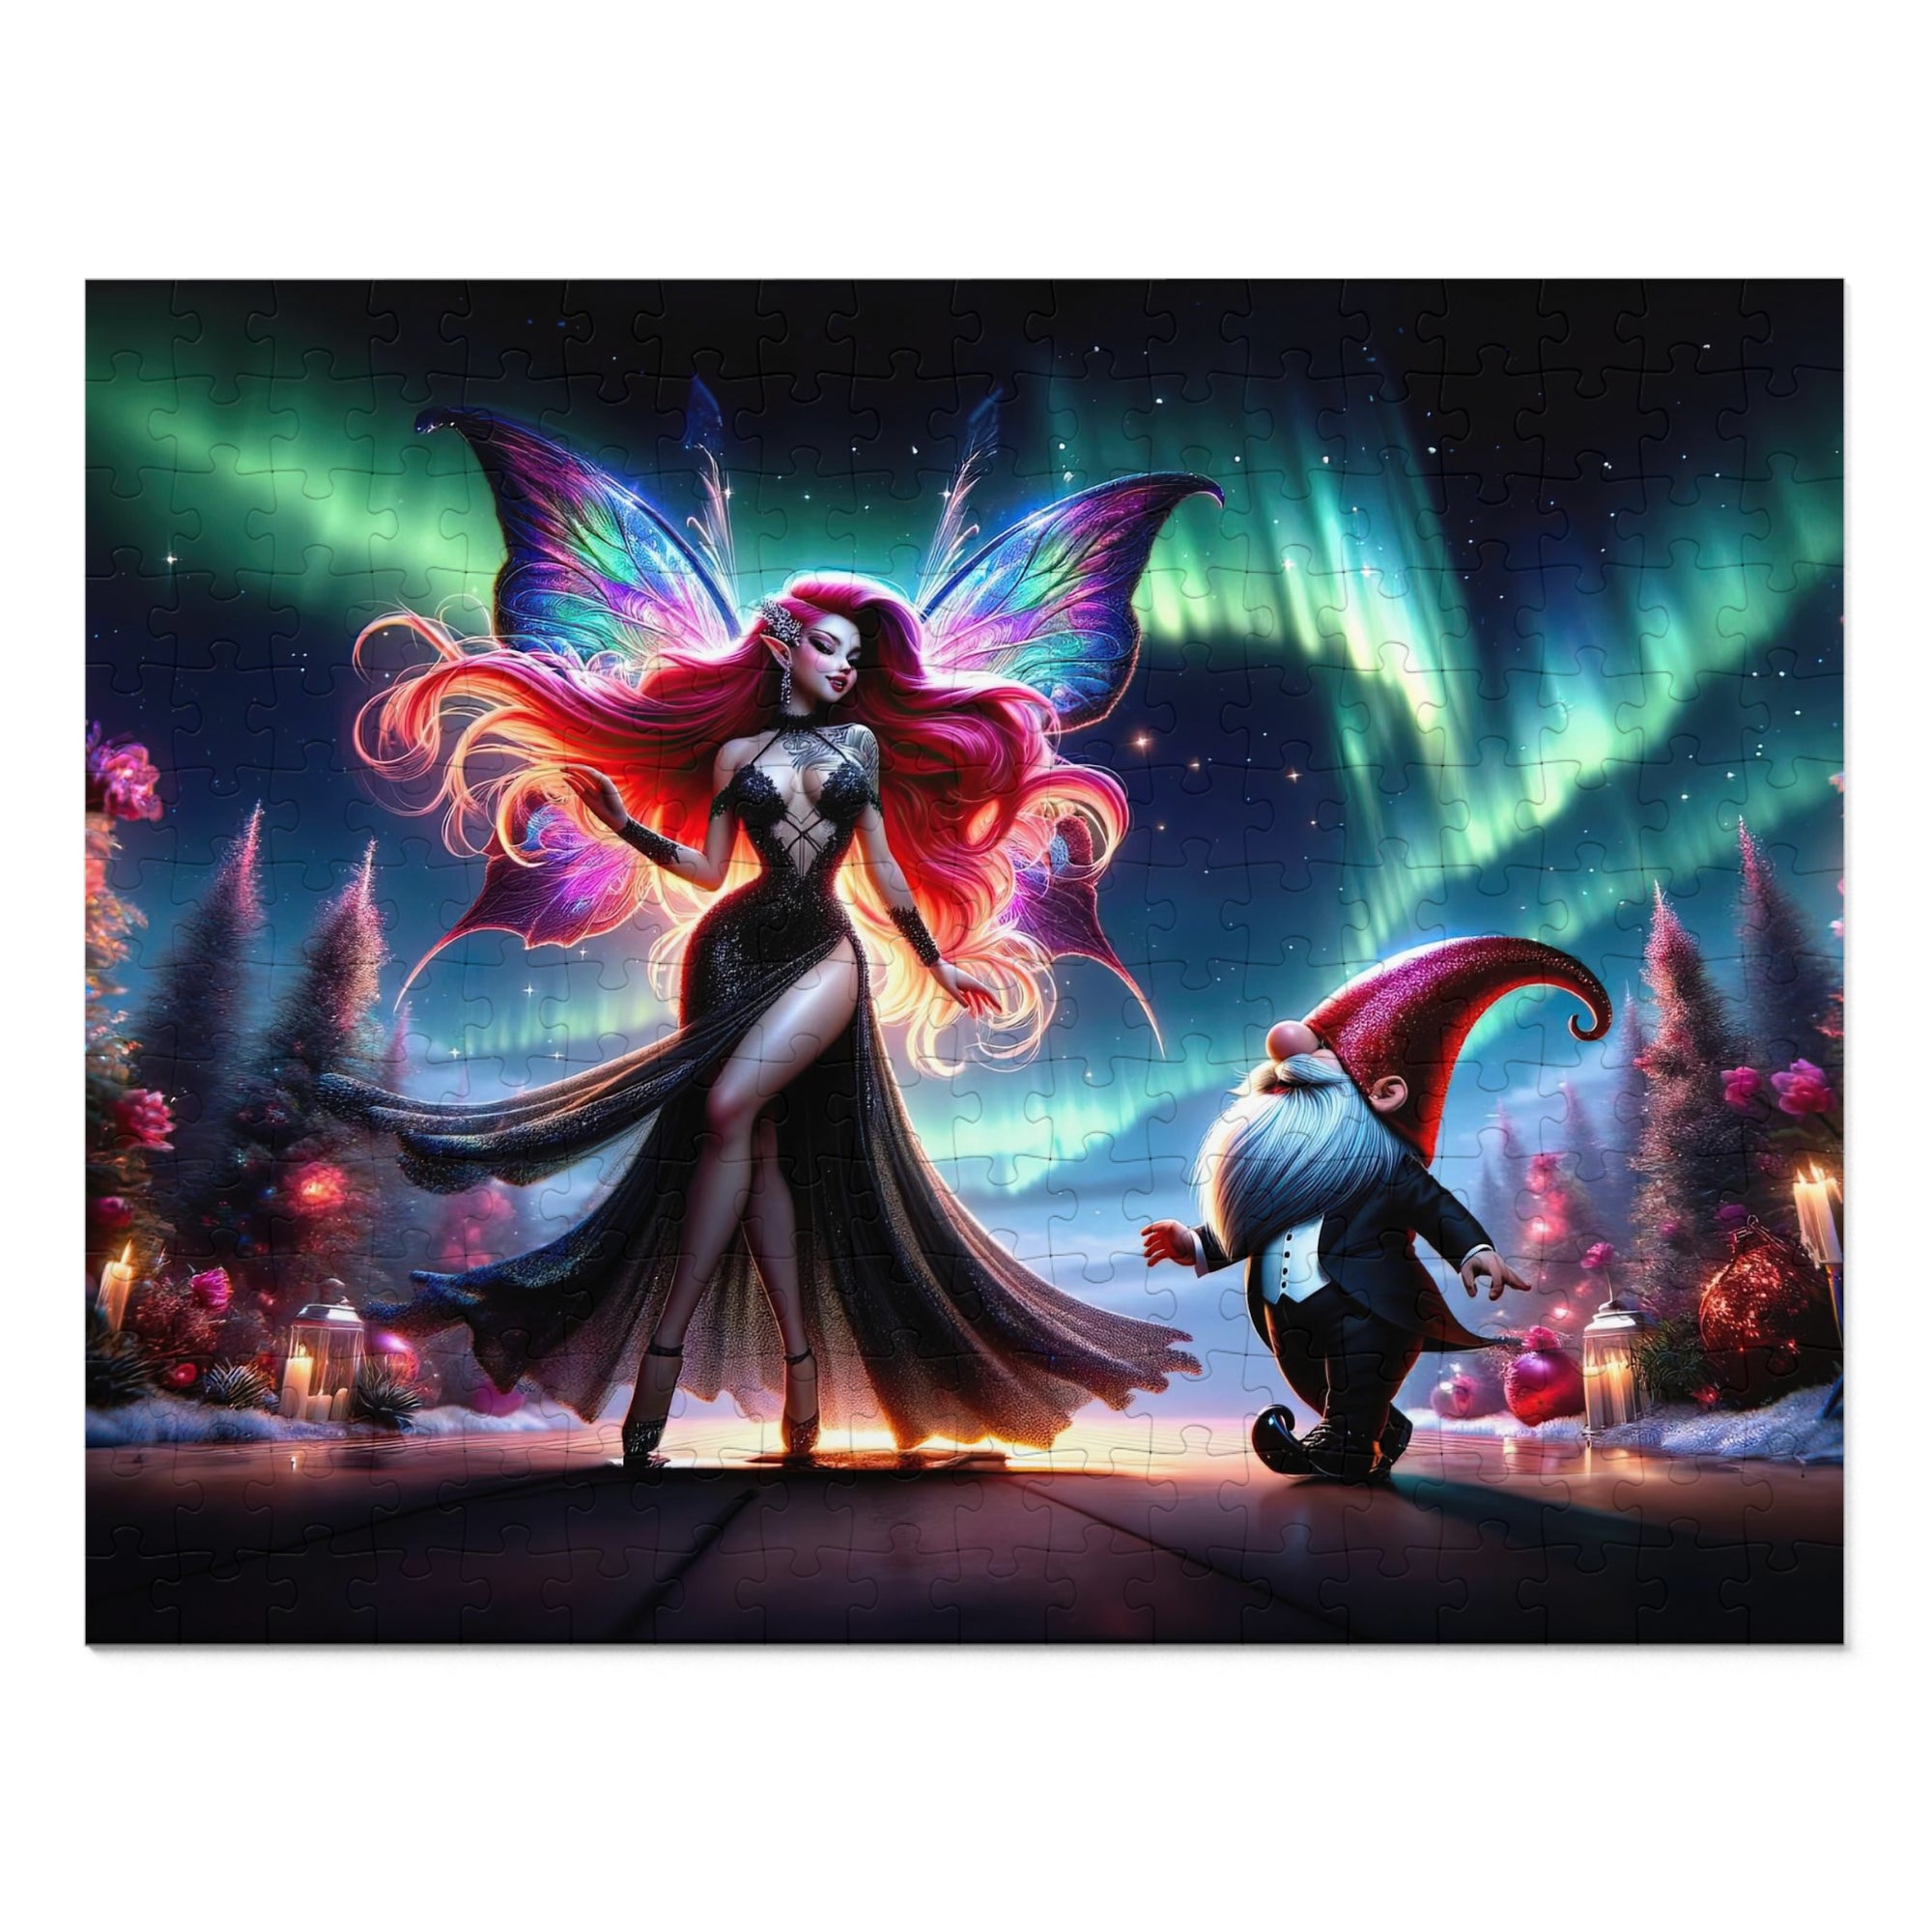 A New Year's Eve Gala Jigsaw Puzzle